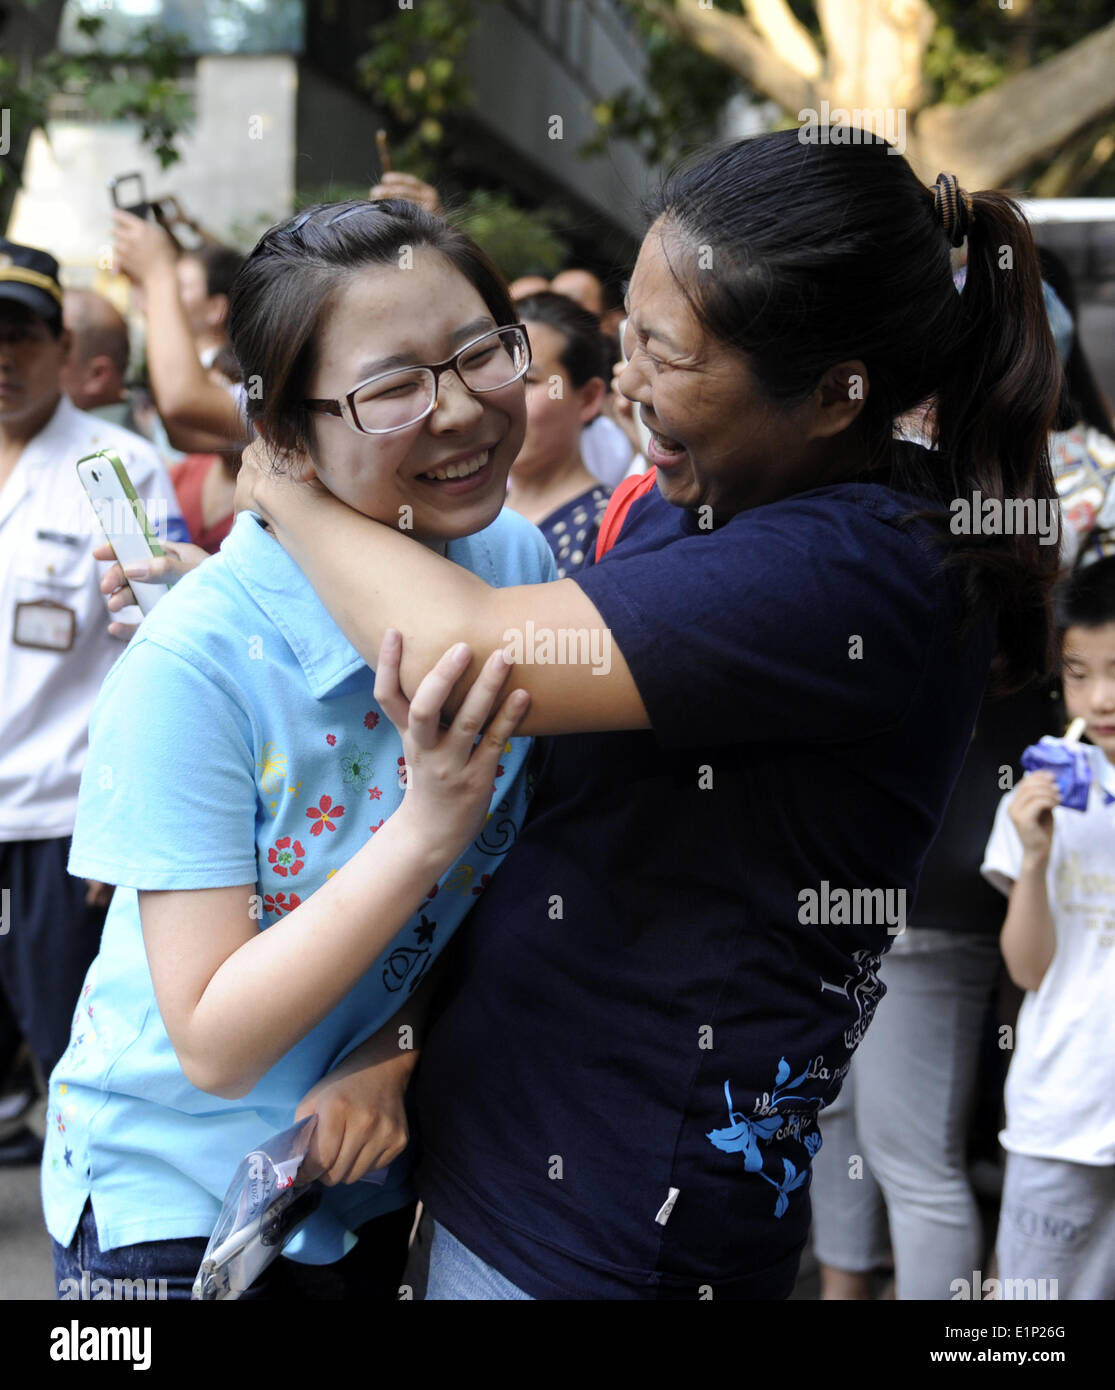 (140608) -- ZHENGZHOU, June 8, 2014 (Xinhua) -- A student embraces her parent after finishing the National College Entrance Exam (NCEE) at Zhengzhou Huimin Middle School in Zhengzhou, capital of central China's Henan Province, June 8, 2014. The 2014 National College Entrance Exam ended on Sunday in most part of China (in a few provinces the NCEE will last for one more day). Statistics show that the NCEE has 9.39 million candidates in 2014, which is 270,000, or 3 percent, more than the 2013 figure. In all, there will be 6.98 million new enrollments at China's higher education institutions this  Stock Photo